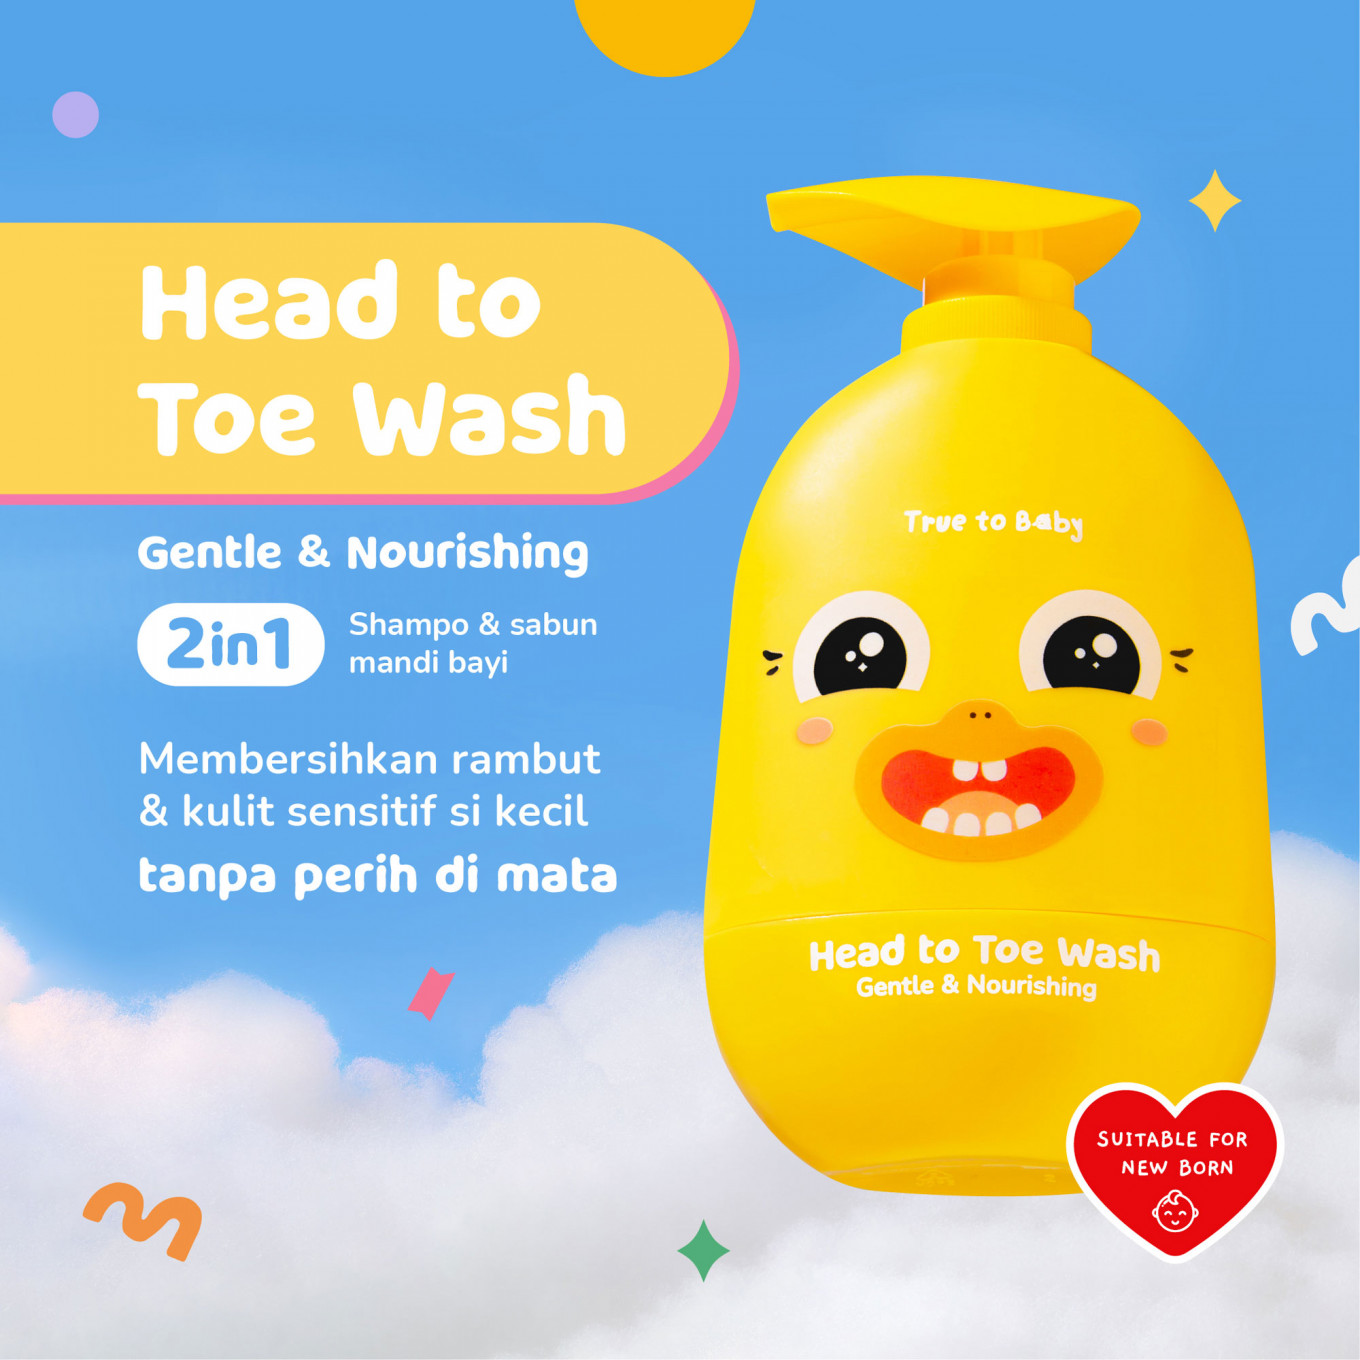 True To Baby launches fun and gentle skincare products for babies, children – Inforial